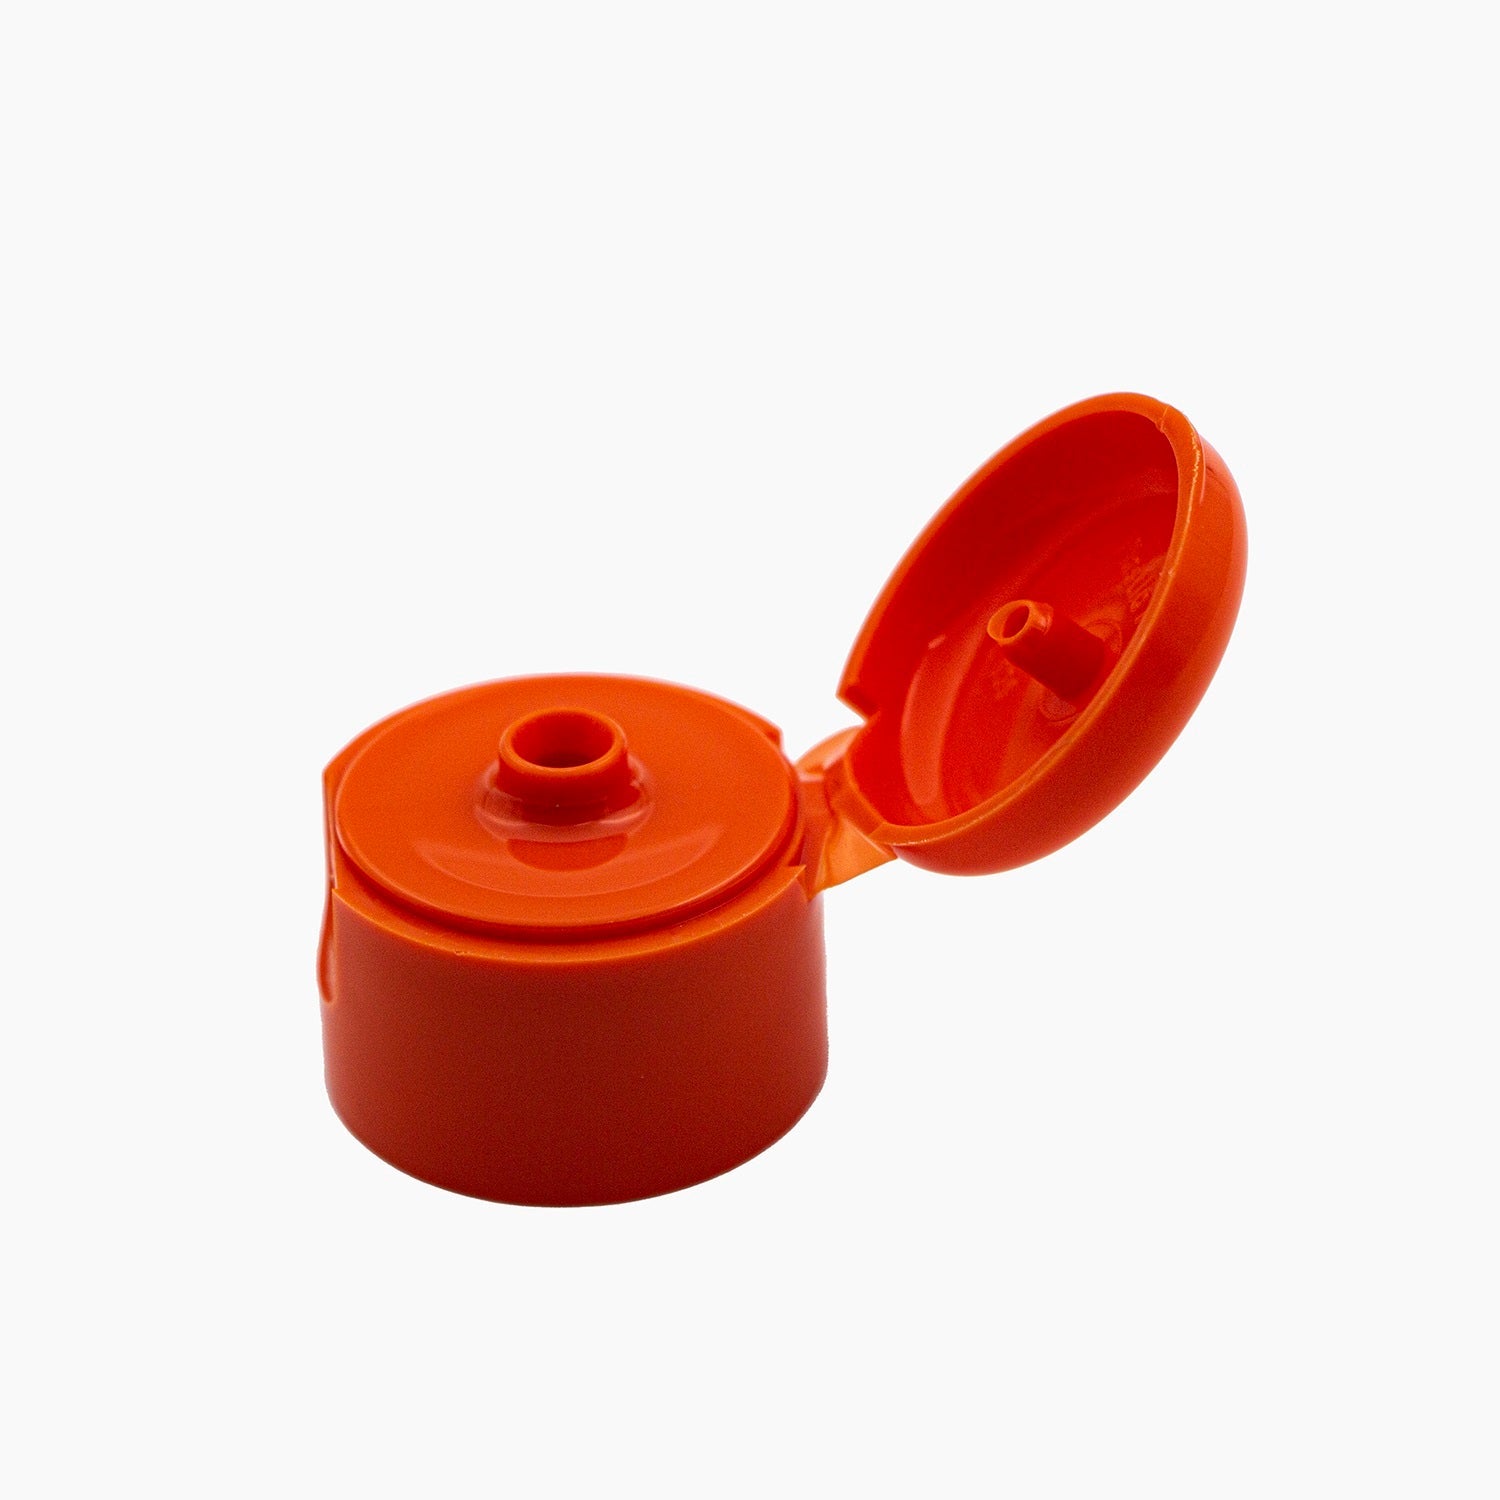 Orange 24mm Open Flip Top Cap On A White Background | Brightpack Closures And Accessories